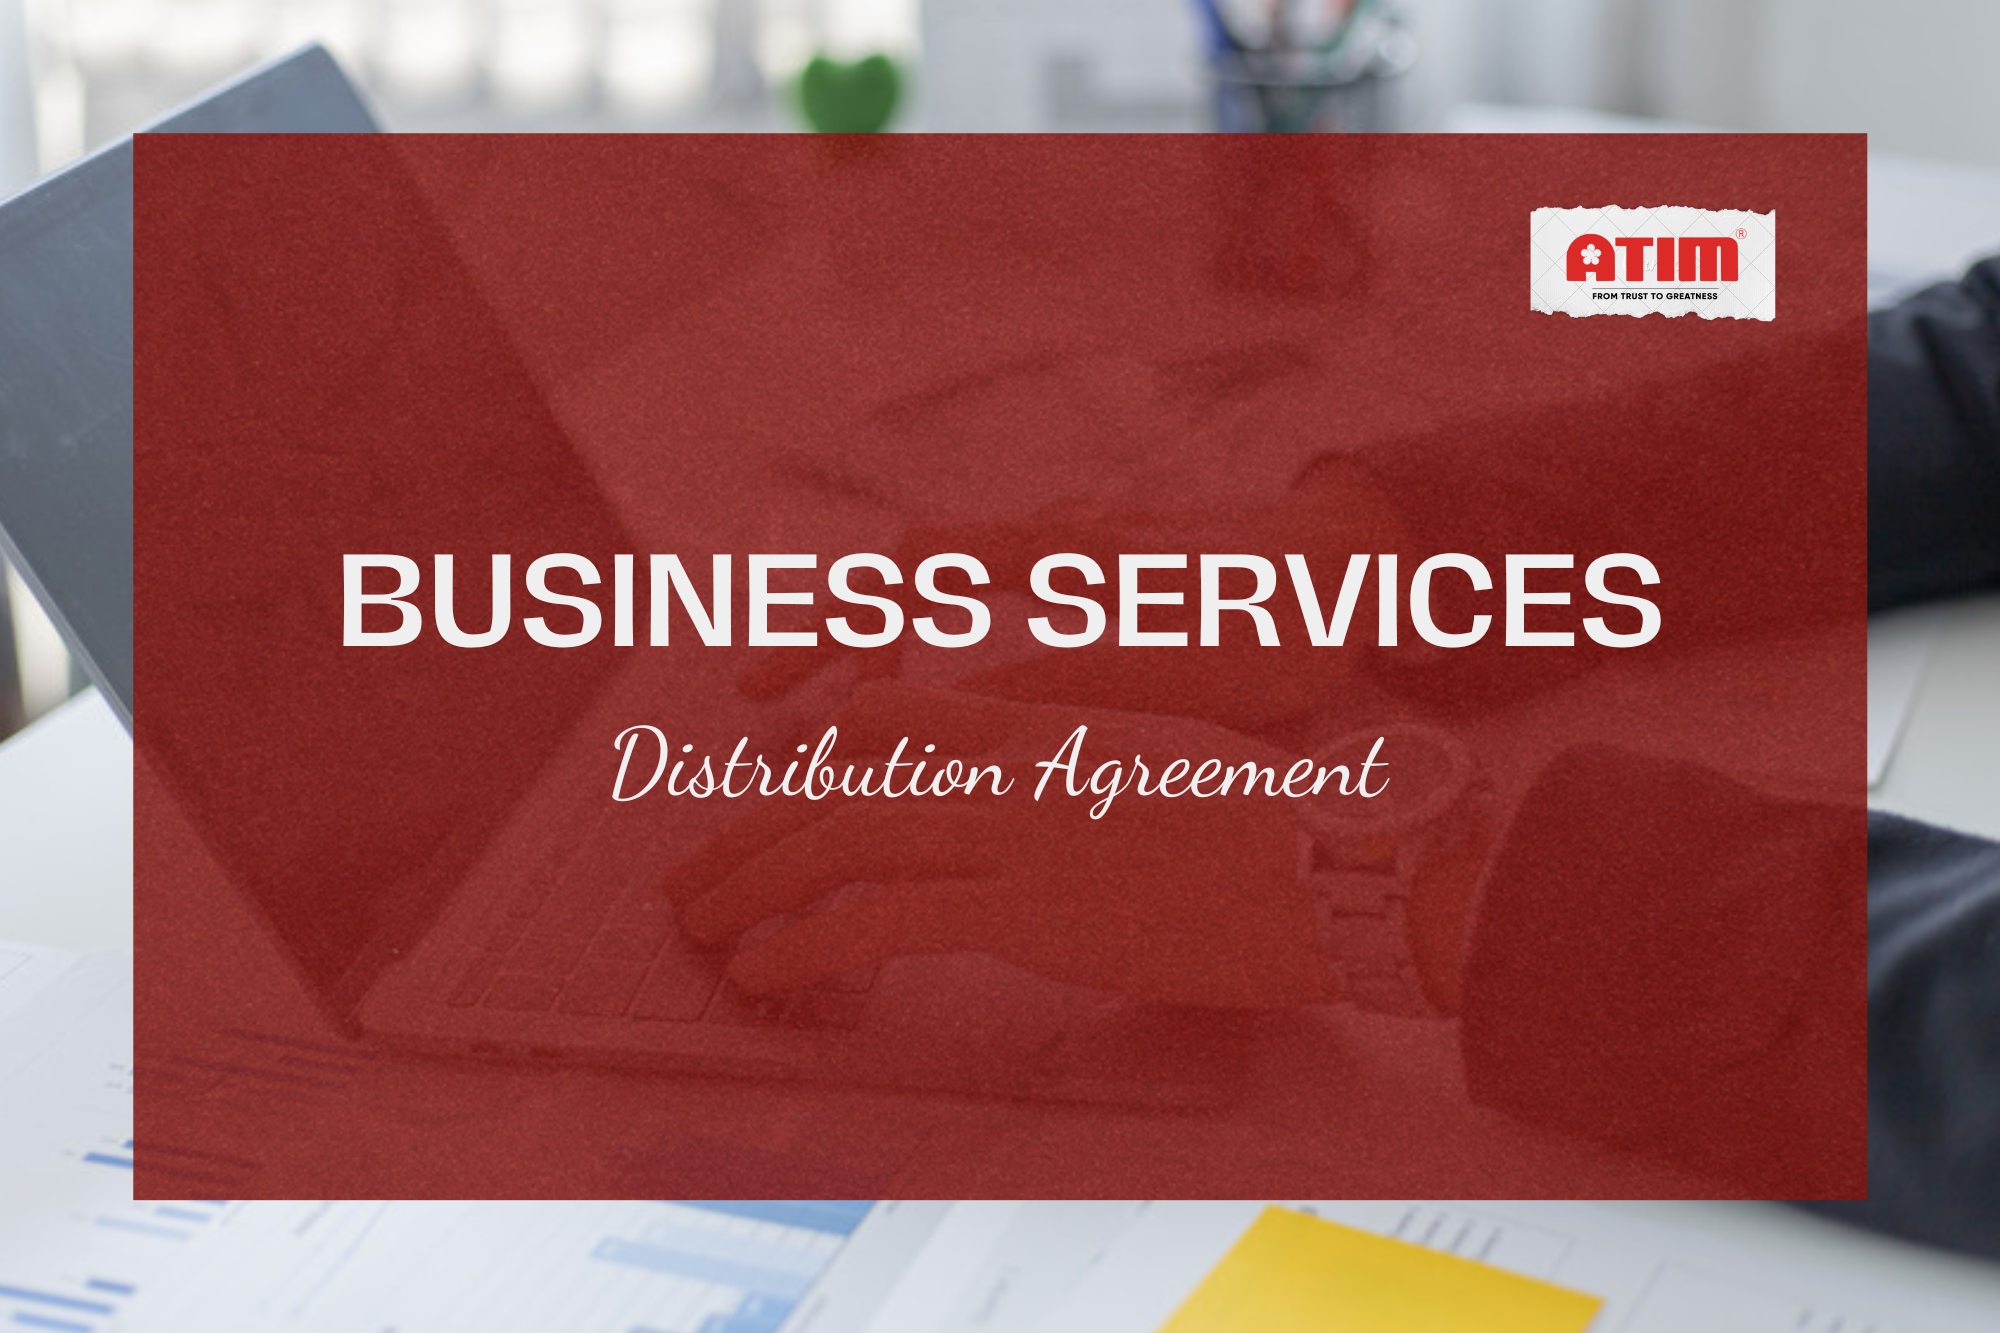 Business Service - Distribution Agreement